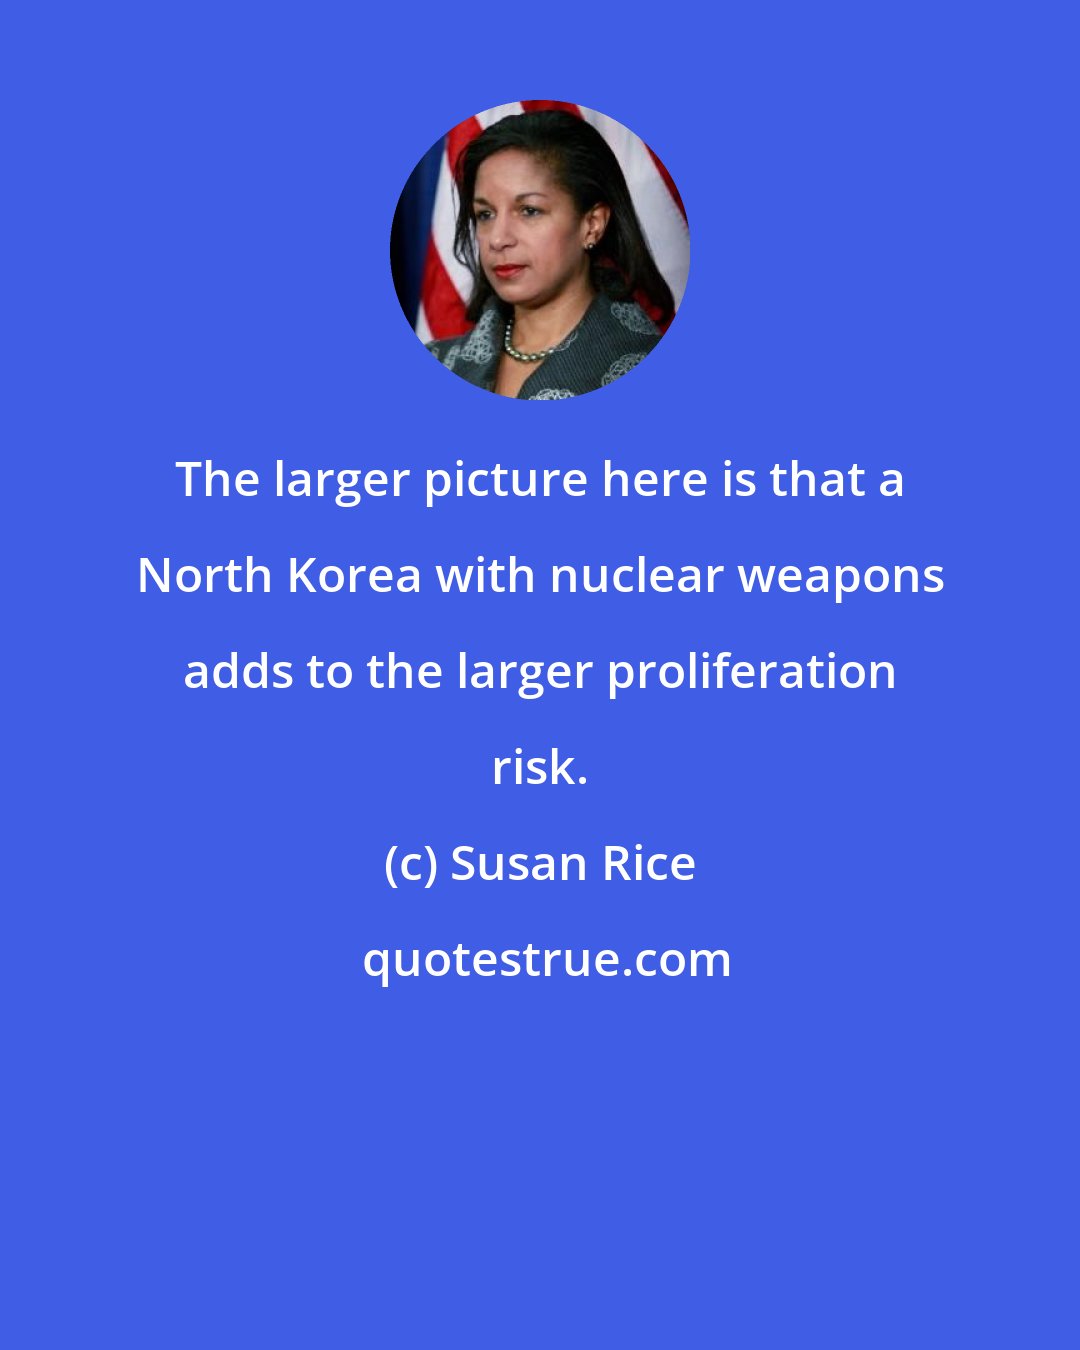 Susan Rice: The larger picture here is that a North Korea with nuclear weapons adds to the larger proliferation risk.